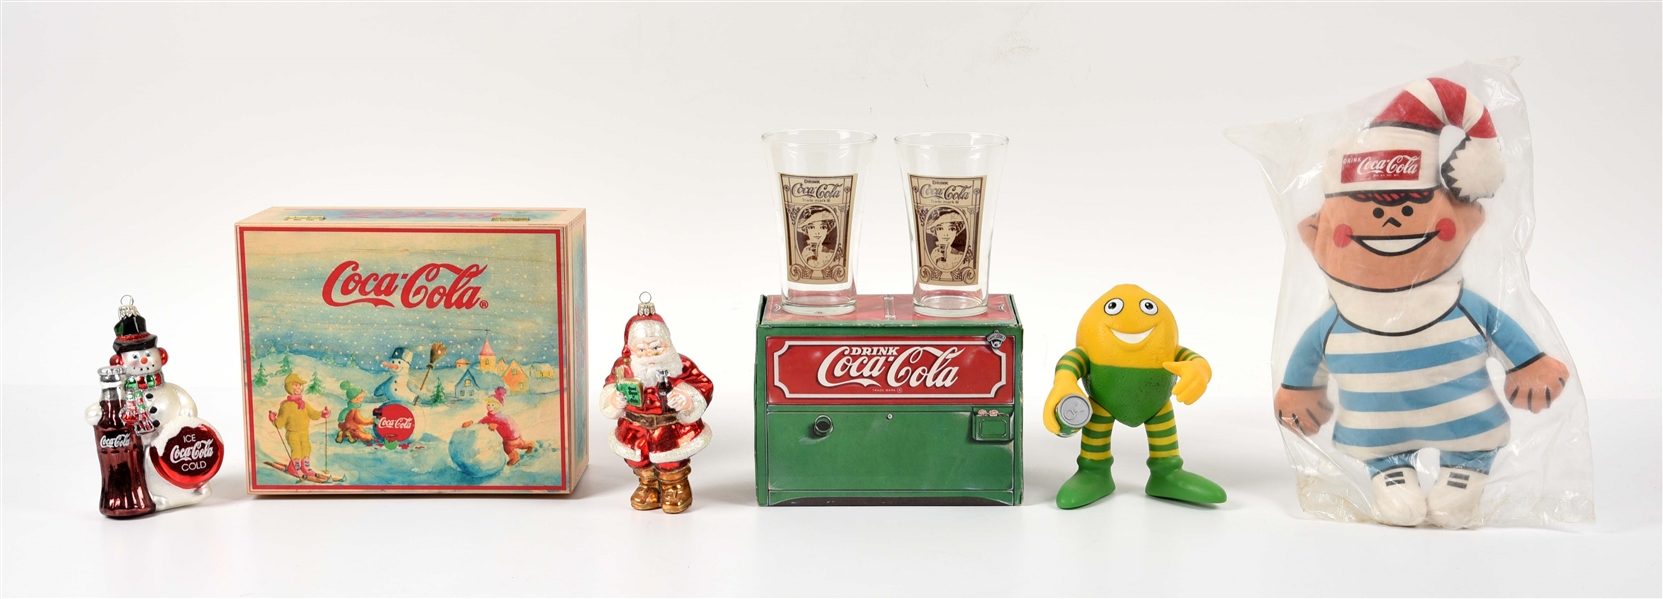 LOT OF 4: COCA-COLA ADVERTISING ITEMS.